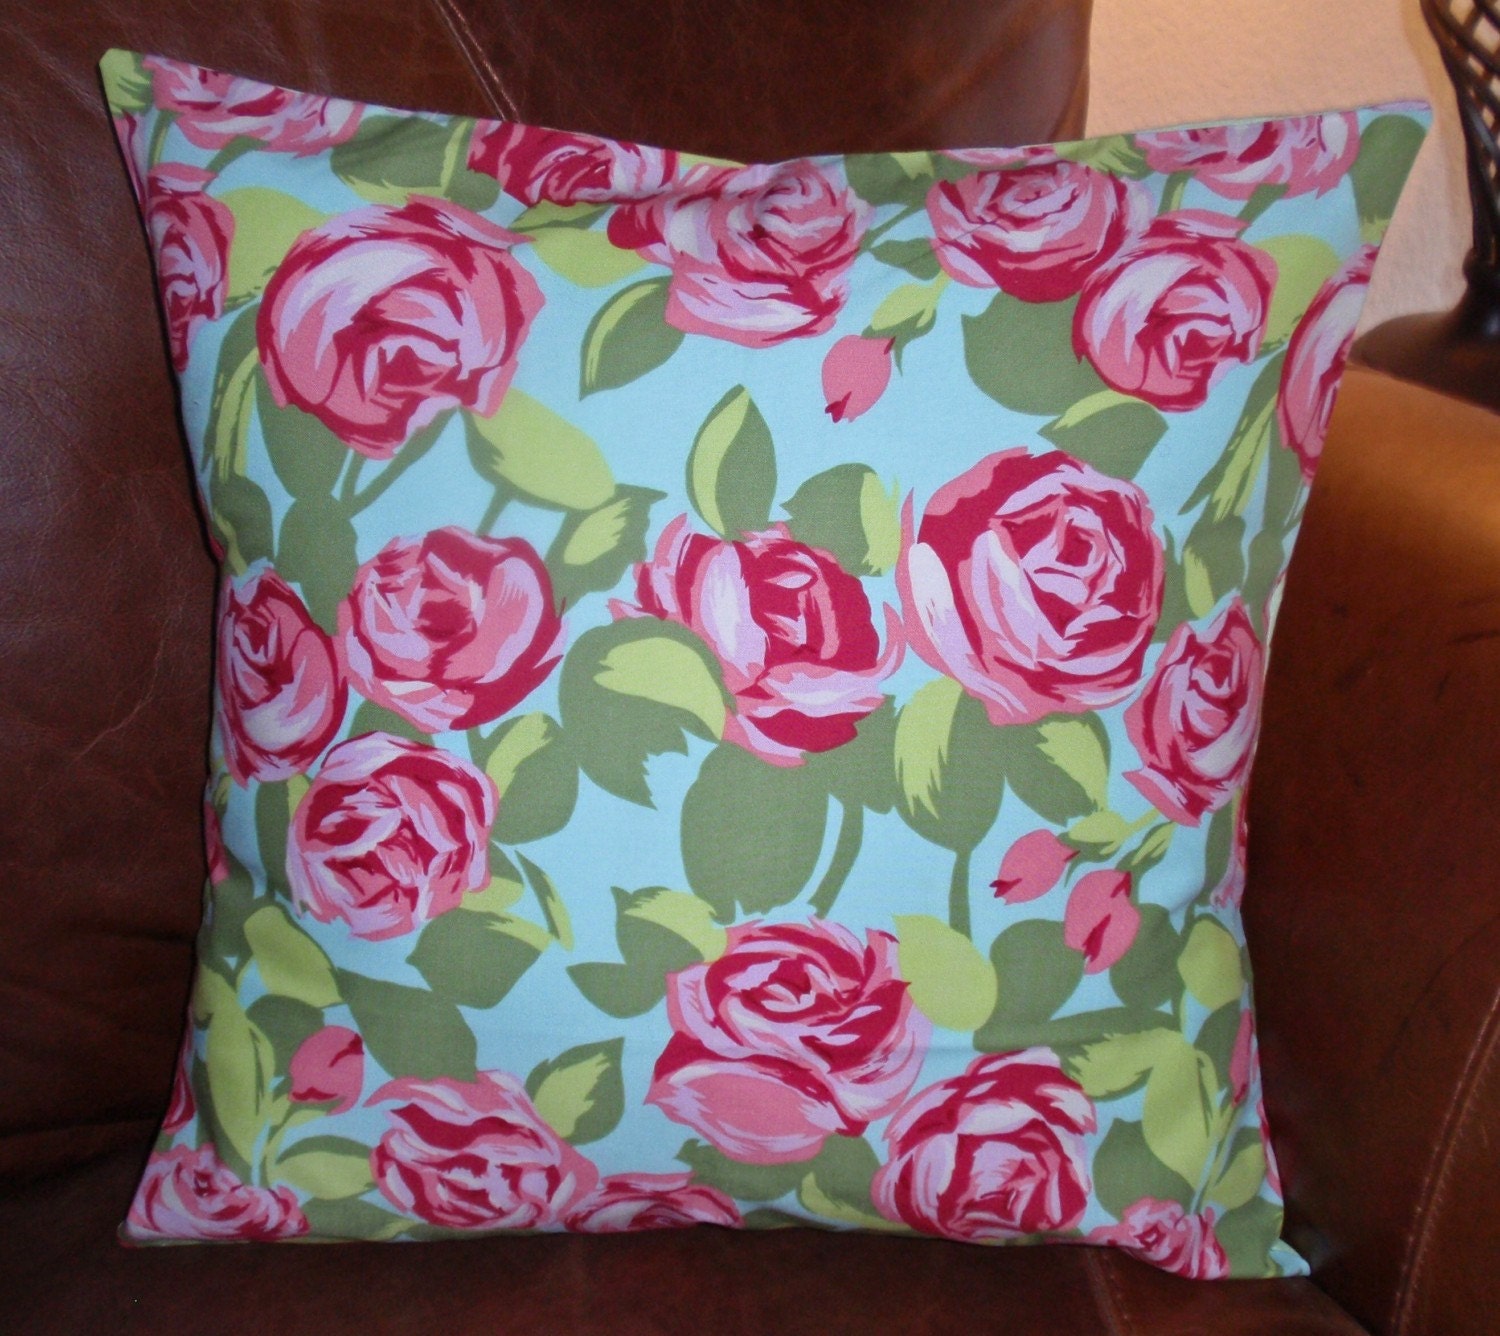 Throw Pillow 16x16 Removable cover sewn with Amy Butler's Tumbled Roses in Pink from the Love Collection